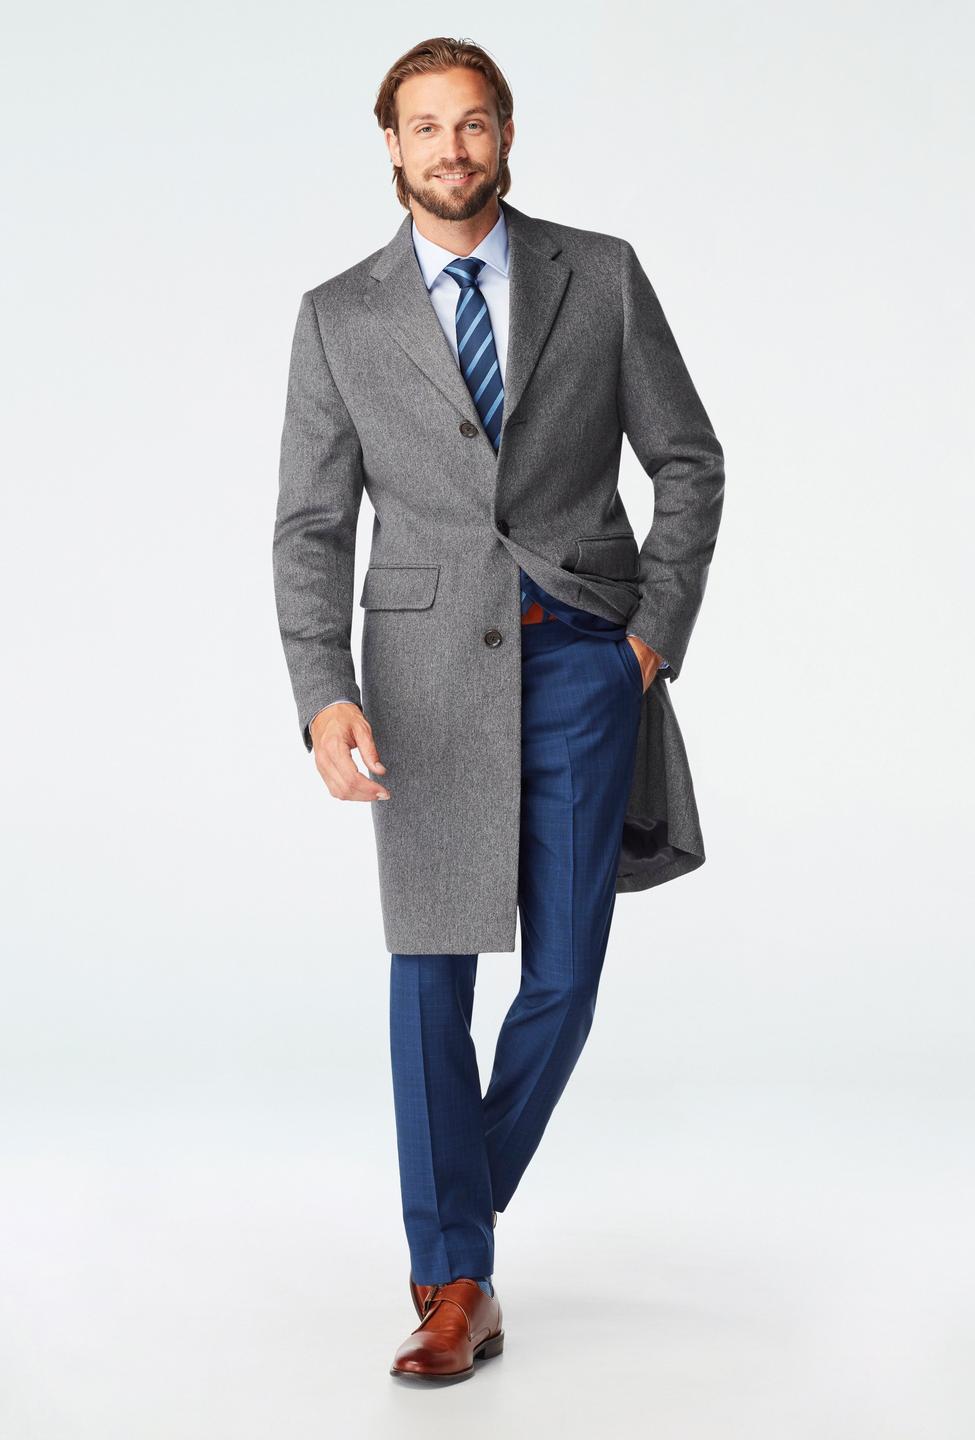 Gray outerwear - Heartford Solid Design from Indochino Collection